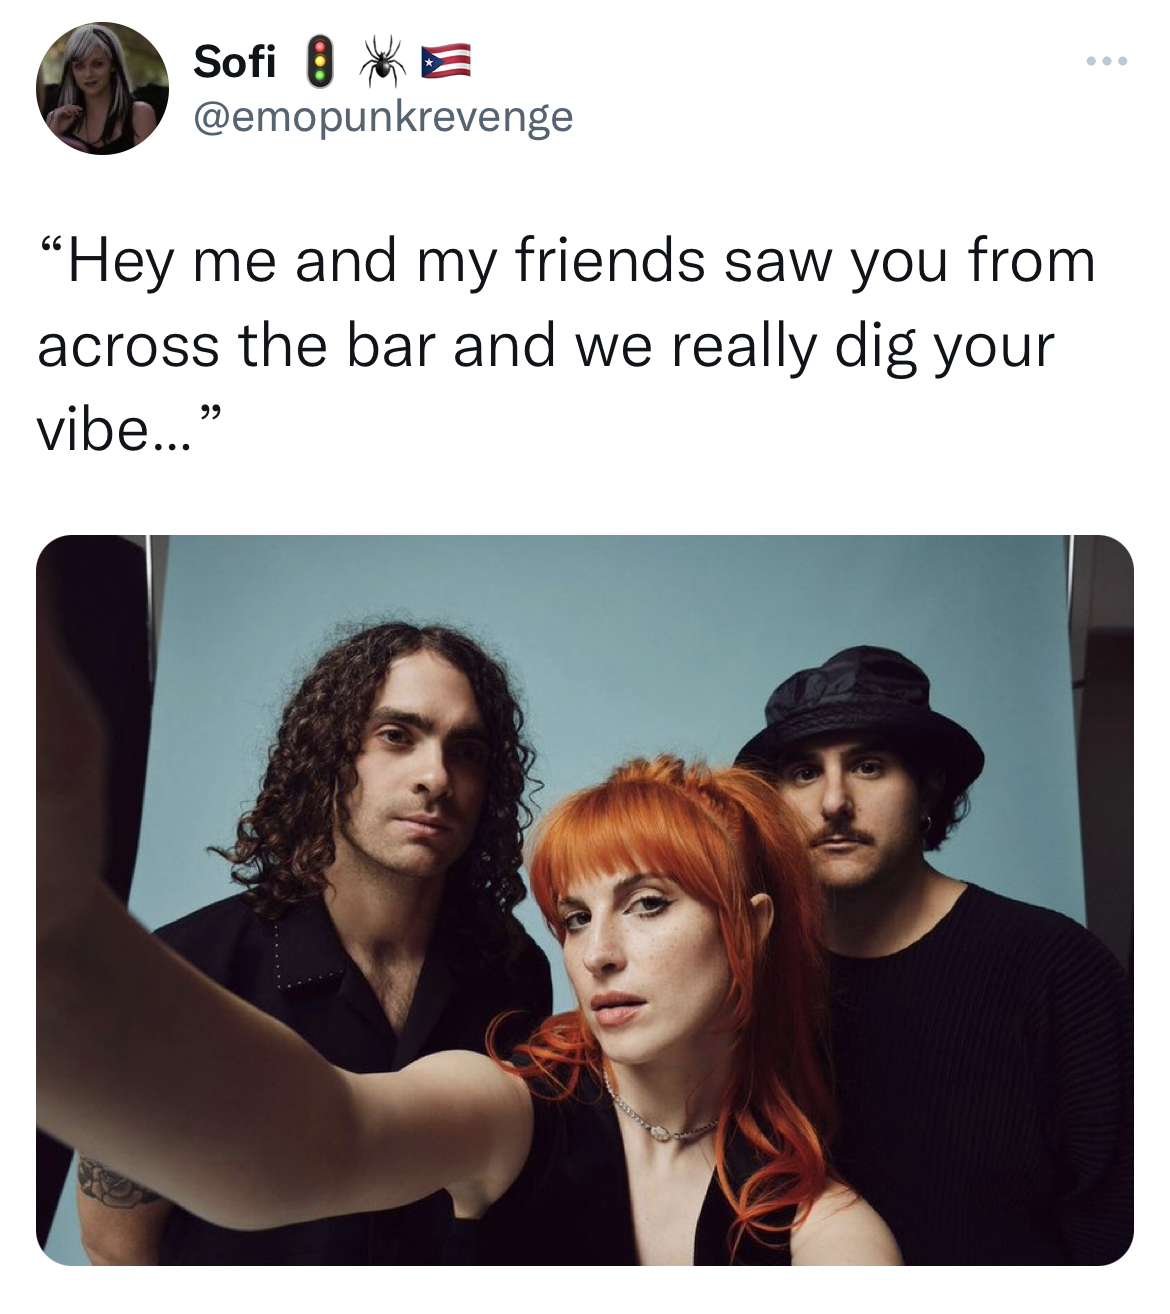 swinger memes across the bar - Paramore - Sofi E "Hey me and my friend saw you from across the bar and we really dig your vibe..."